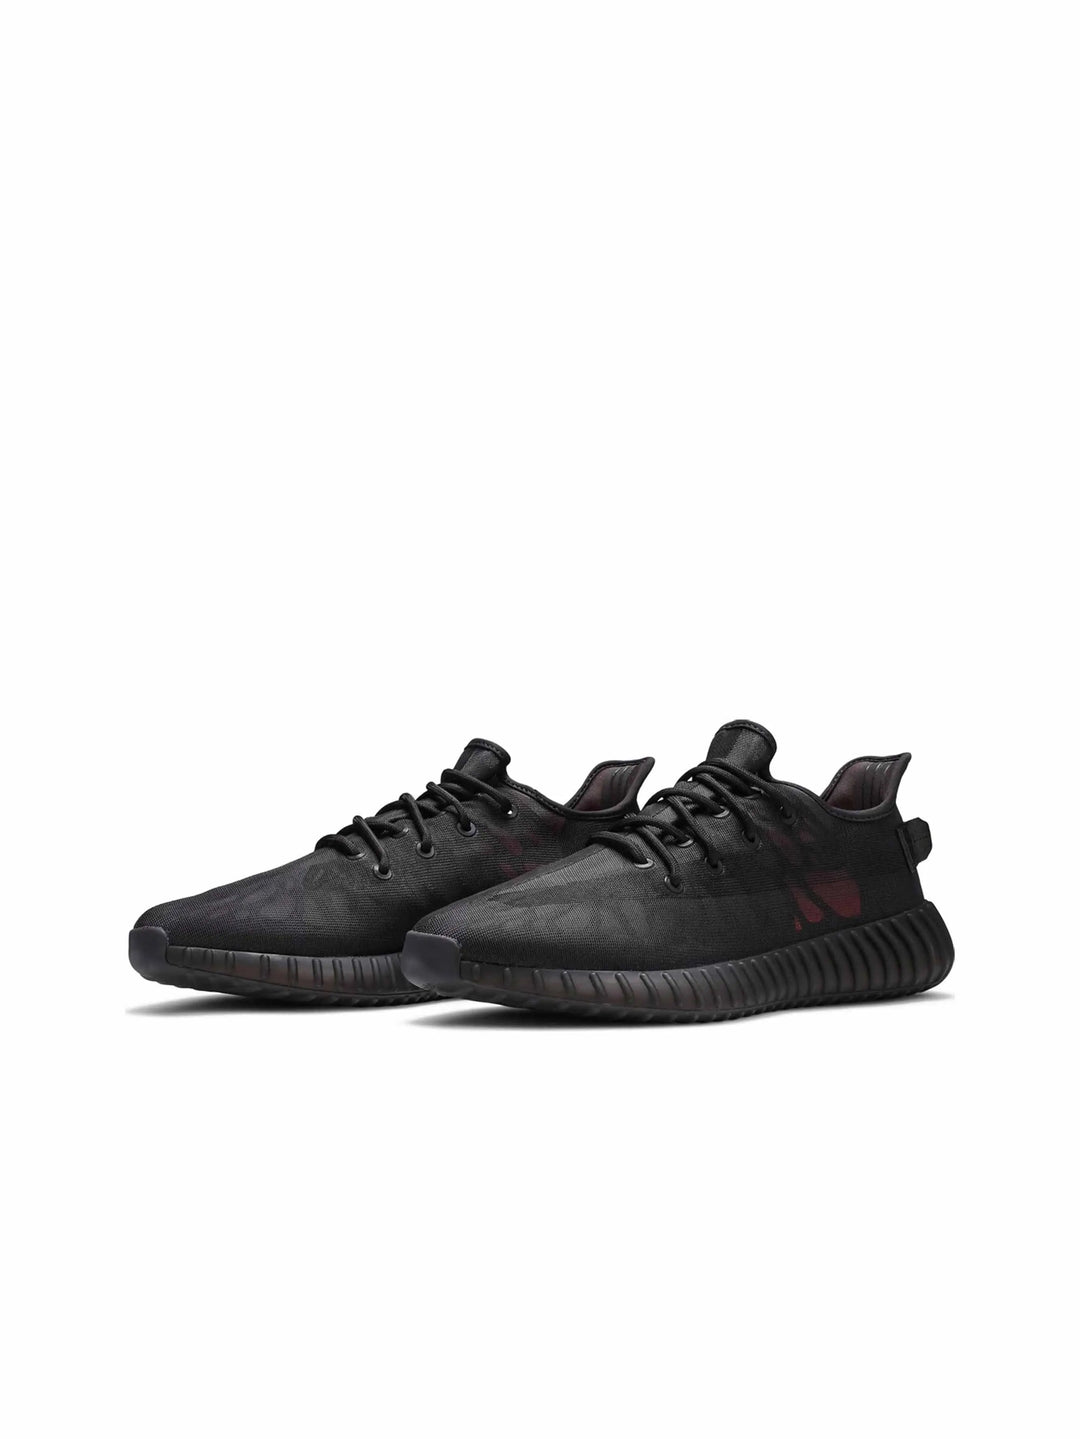 adidas Yeezy Boost 350 V2 Mono Cinder in Auckland, New Zealand - Shop name